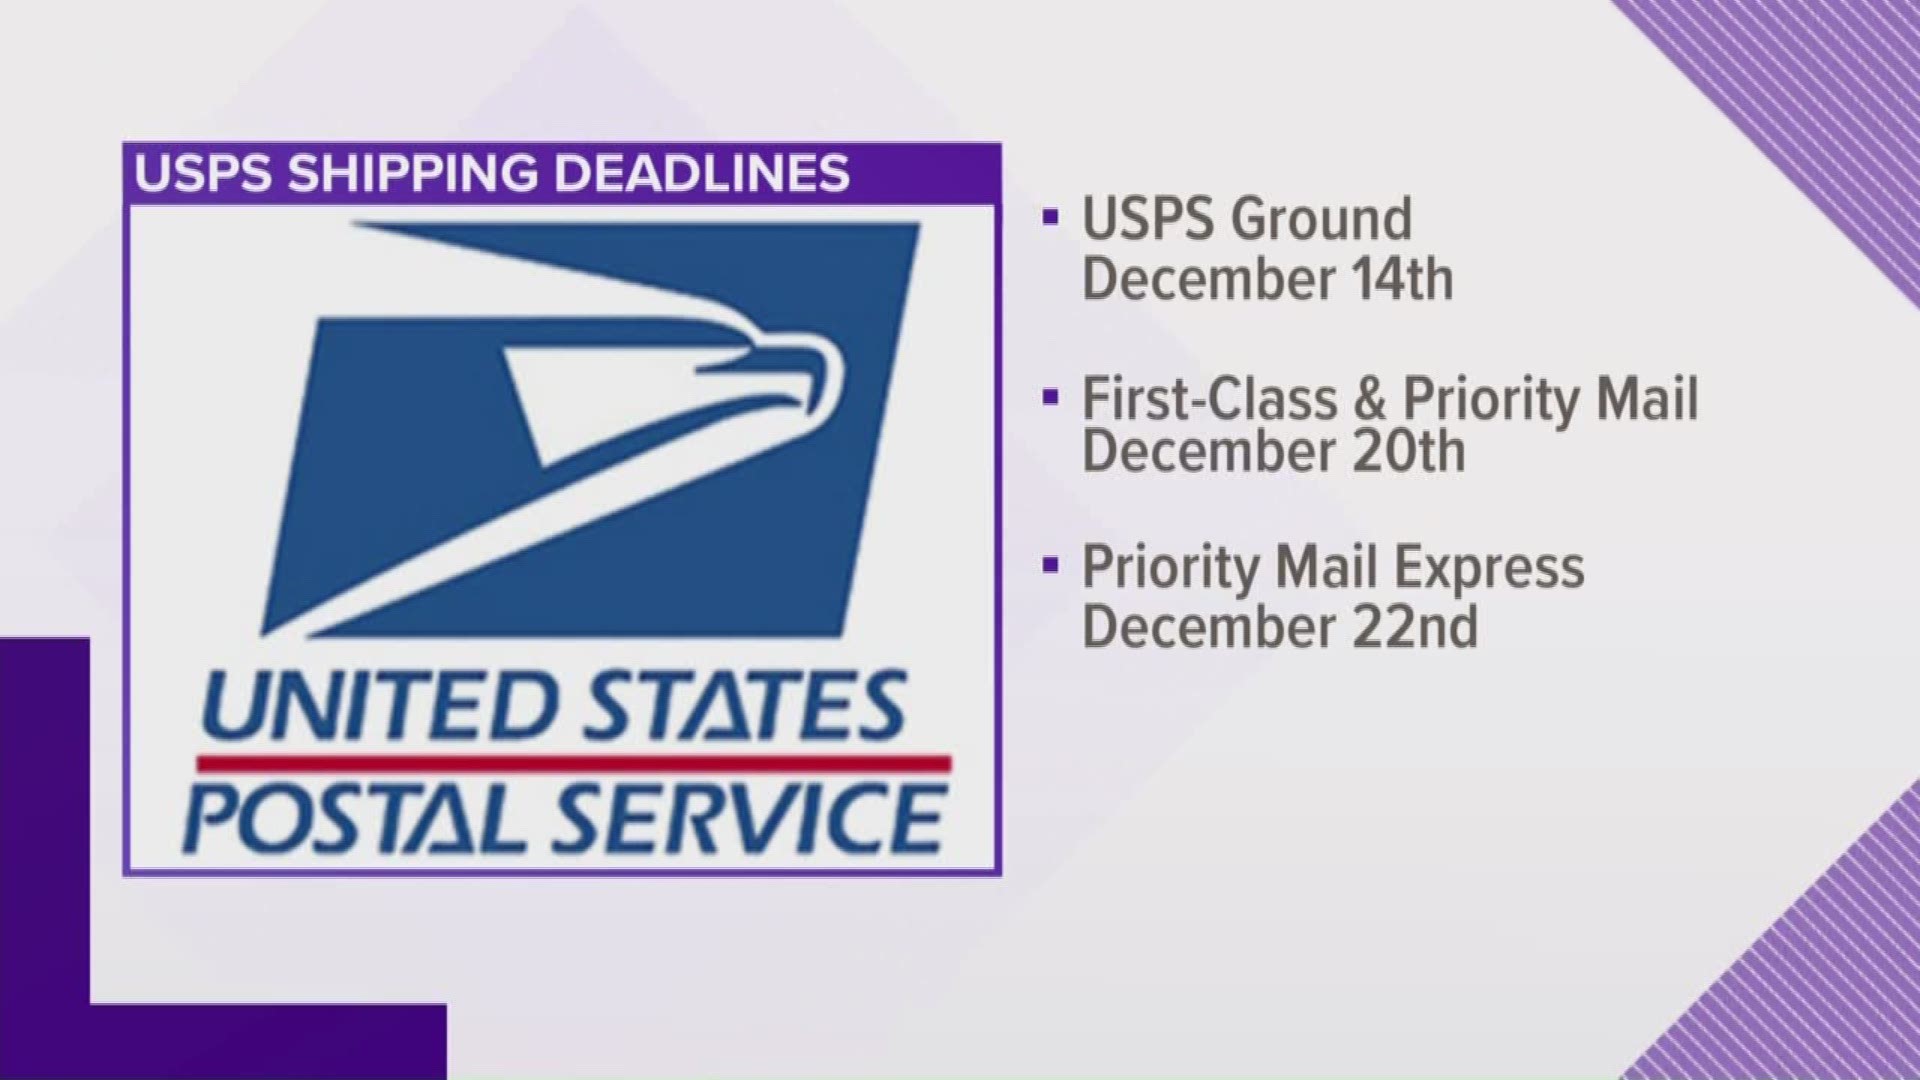 Thanksgiving to Christmas is always peak season for the Postal Service, but with the spike in online shopping due to COVID-19, USPS is expecting a busy month.